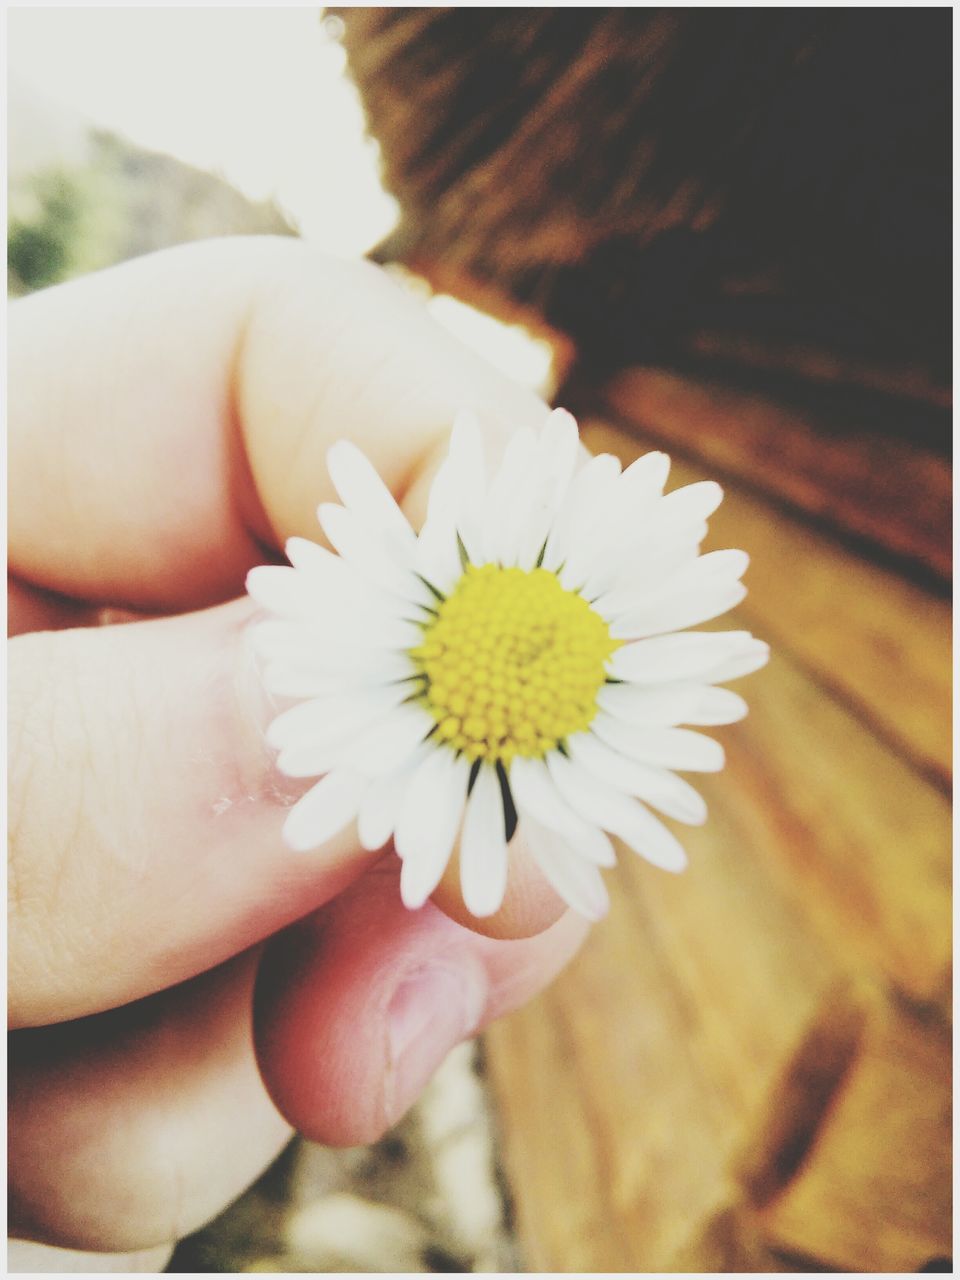 flower, person, petal, flower head, fragility, holding, freshness, part of, white color, daisy, single flower, close-up, pollen, cropped, human finger, unrecognizable person, personal perspective